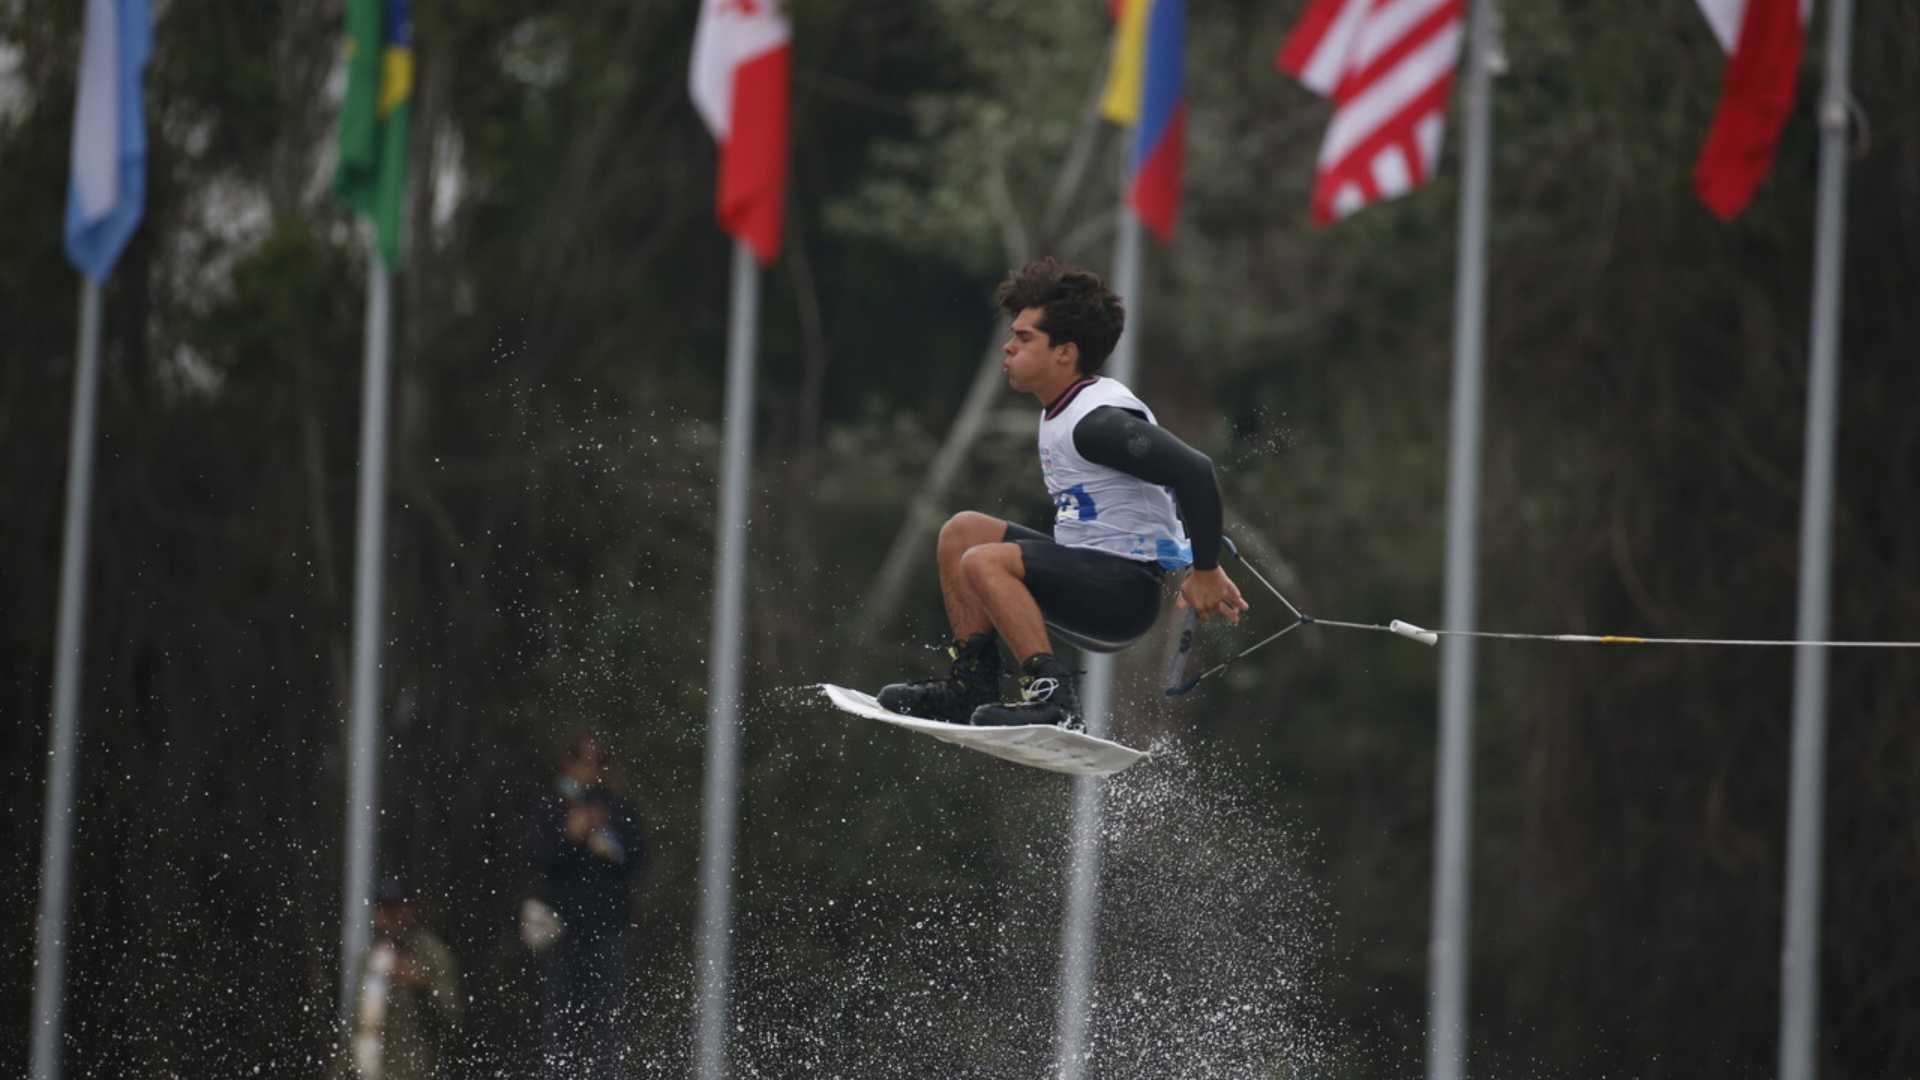 Water skiing determines the first qualifiers for the wakeboard final